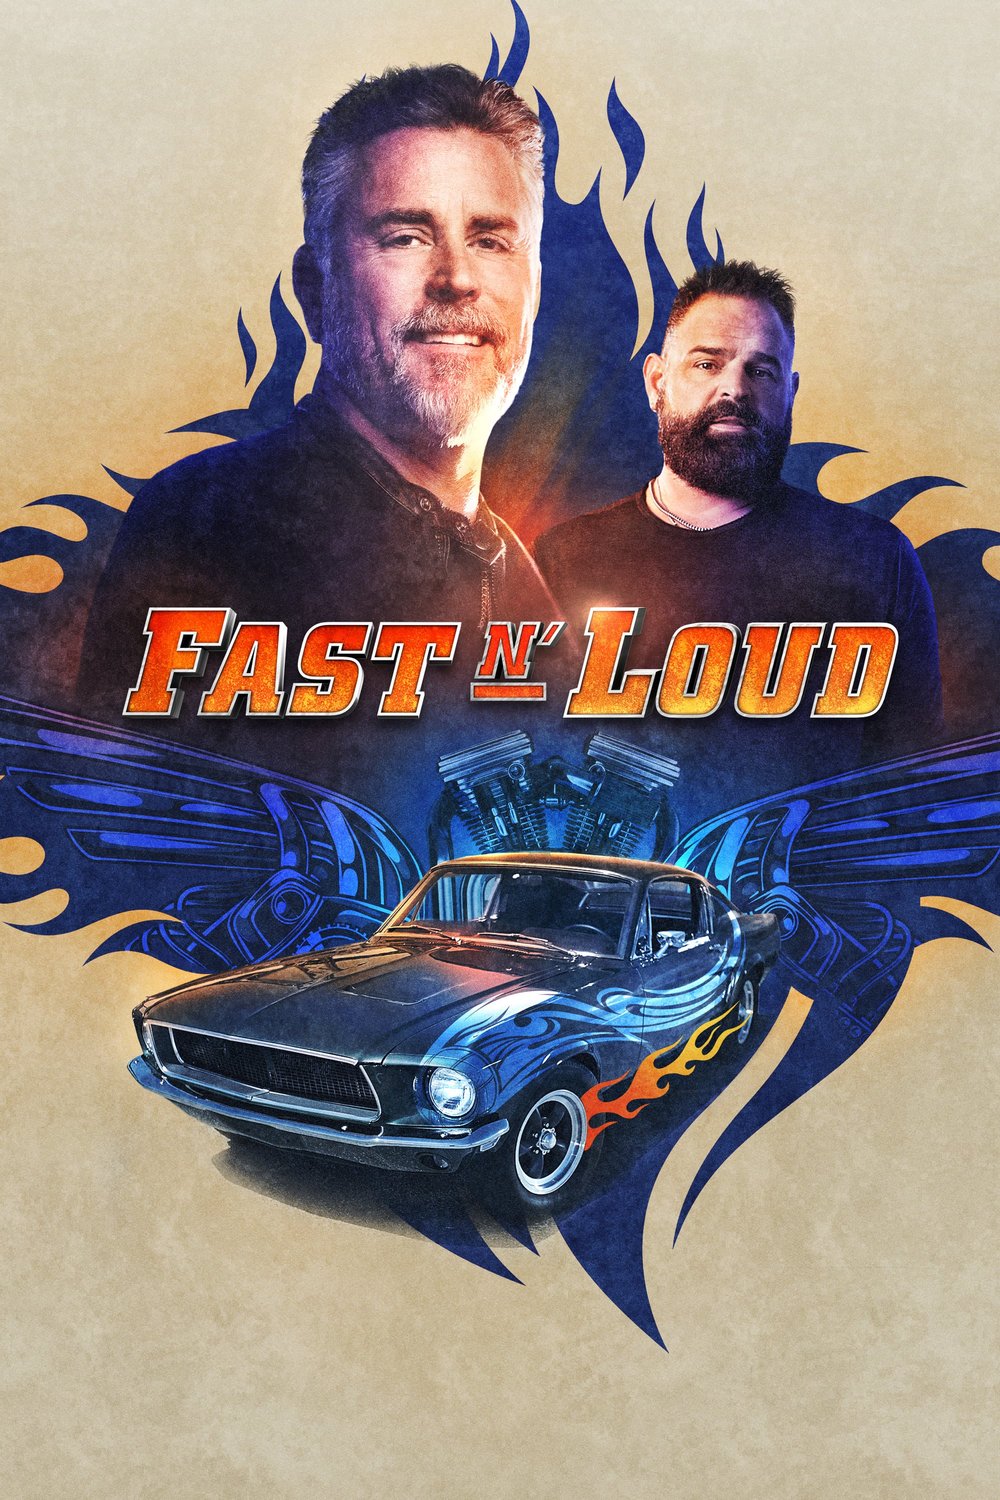 Poster of the movie Fast n' Loud